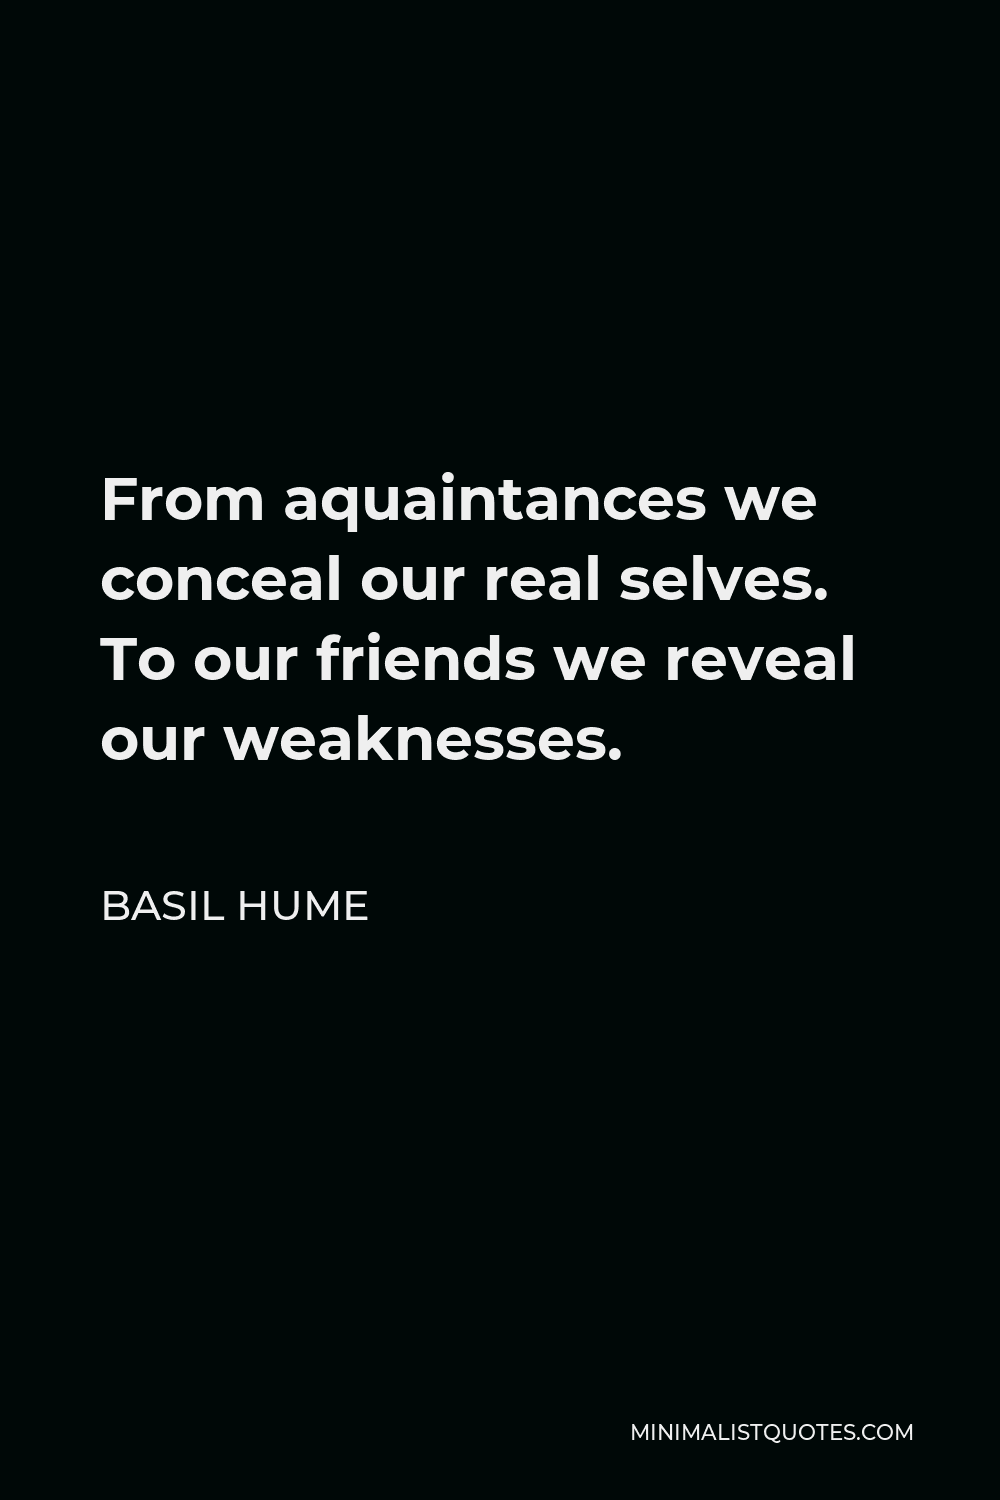 Basil Hume Quote - From aquaintances we conceal our real selves. To our friends we reveal our weaknesses.